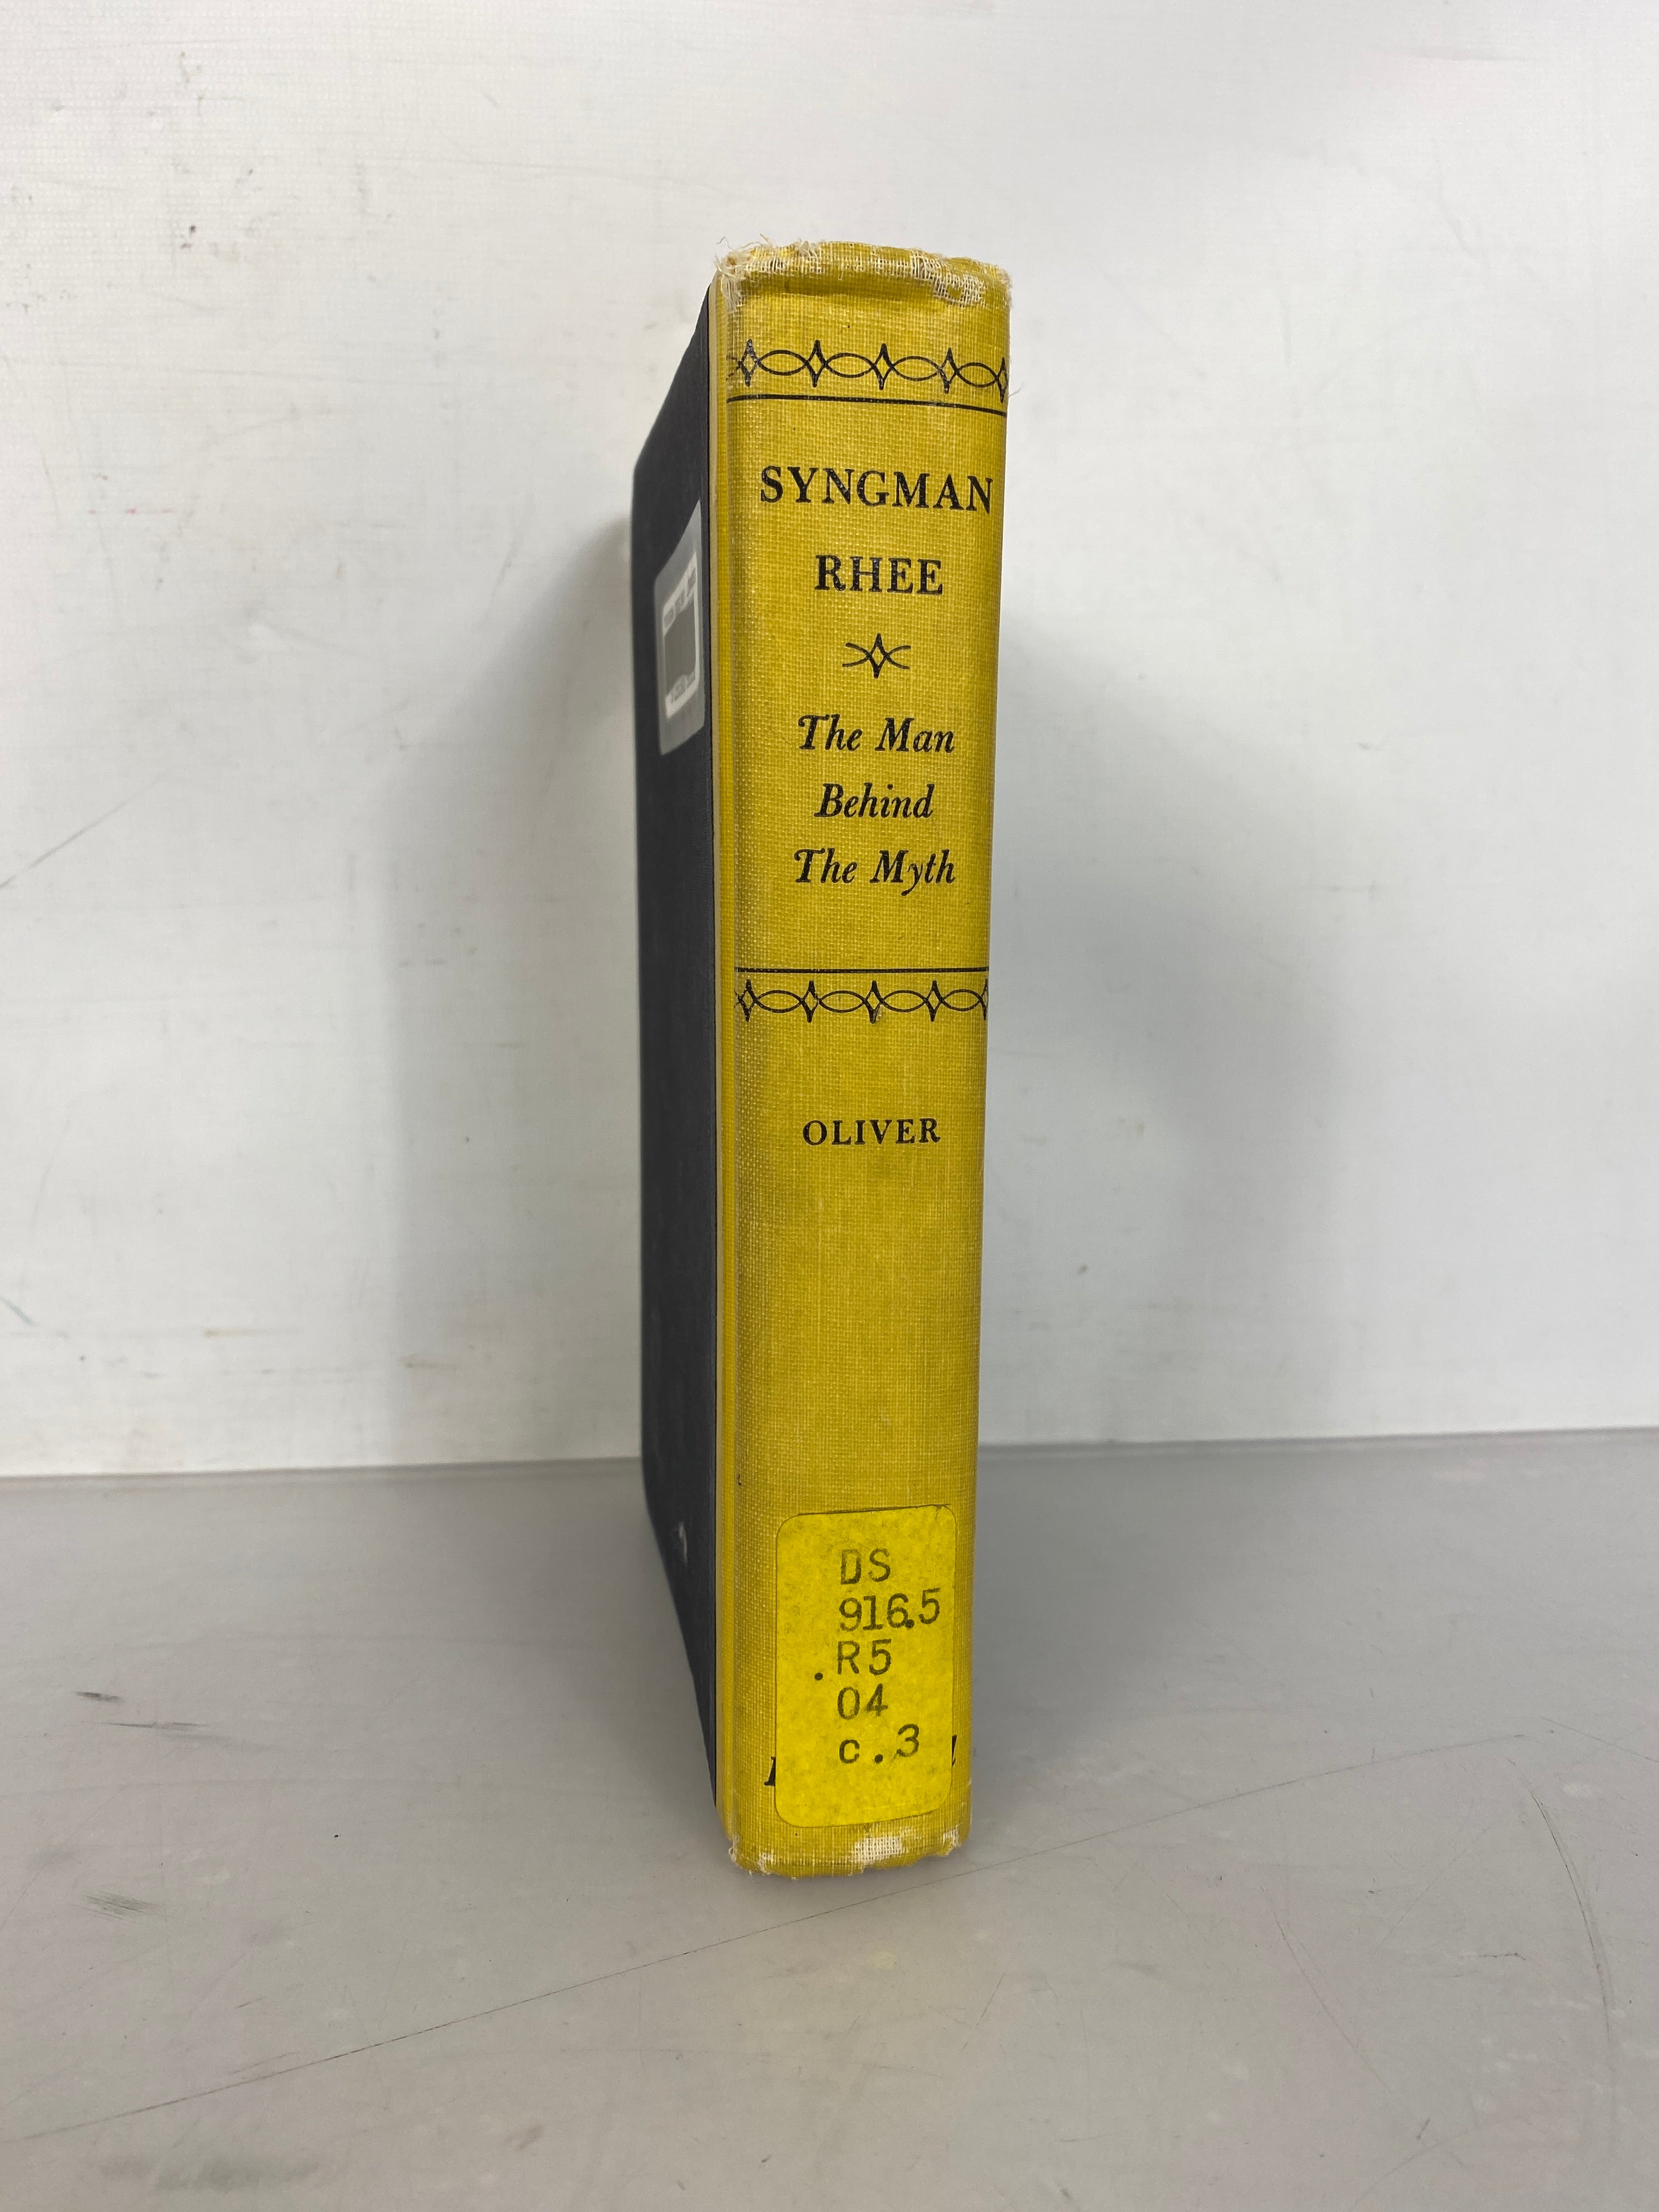 Syngman Rhee The Man Behind the Myth by Robert T. Oliver 1960 HC